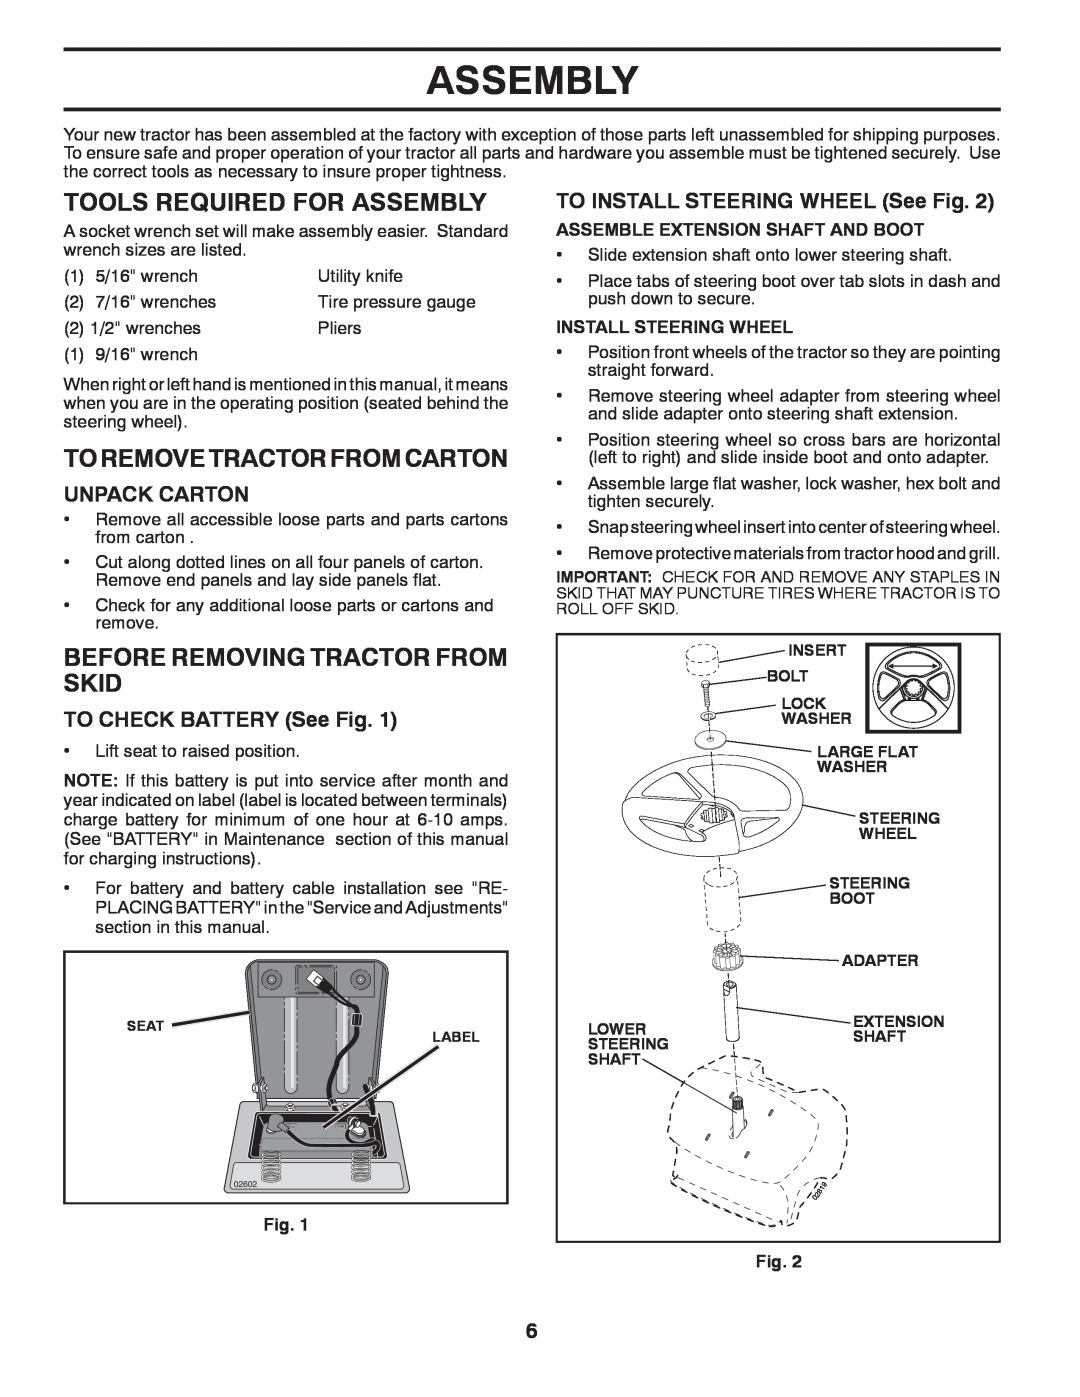 Poulan 424008 manual Tools Required For Assembly, To Remove Tractor From Carton, Before Removing Tractor From Skid 